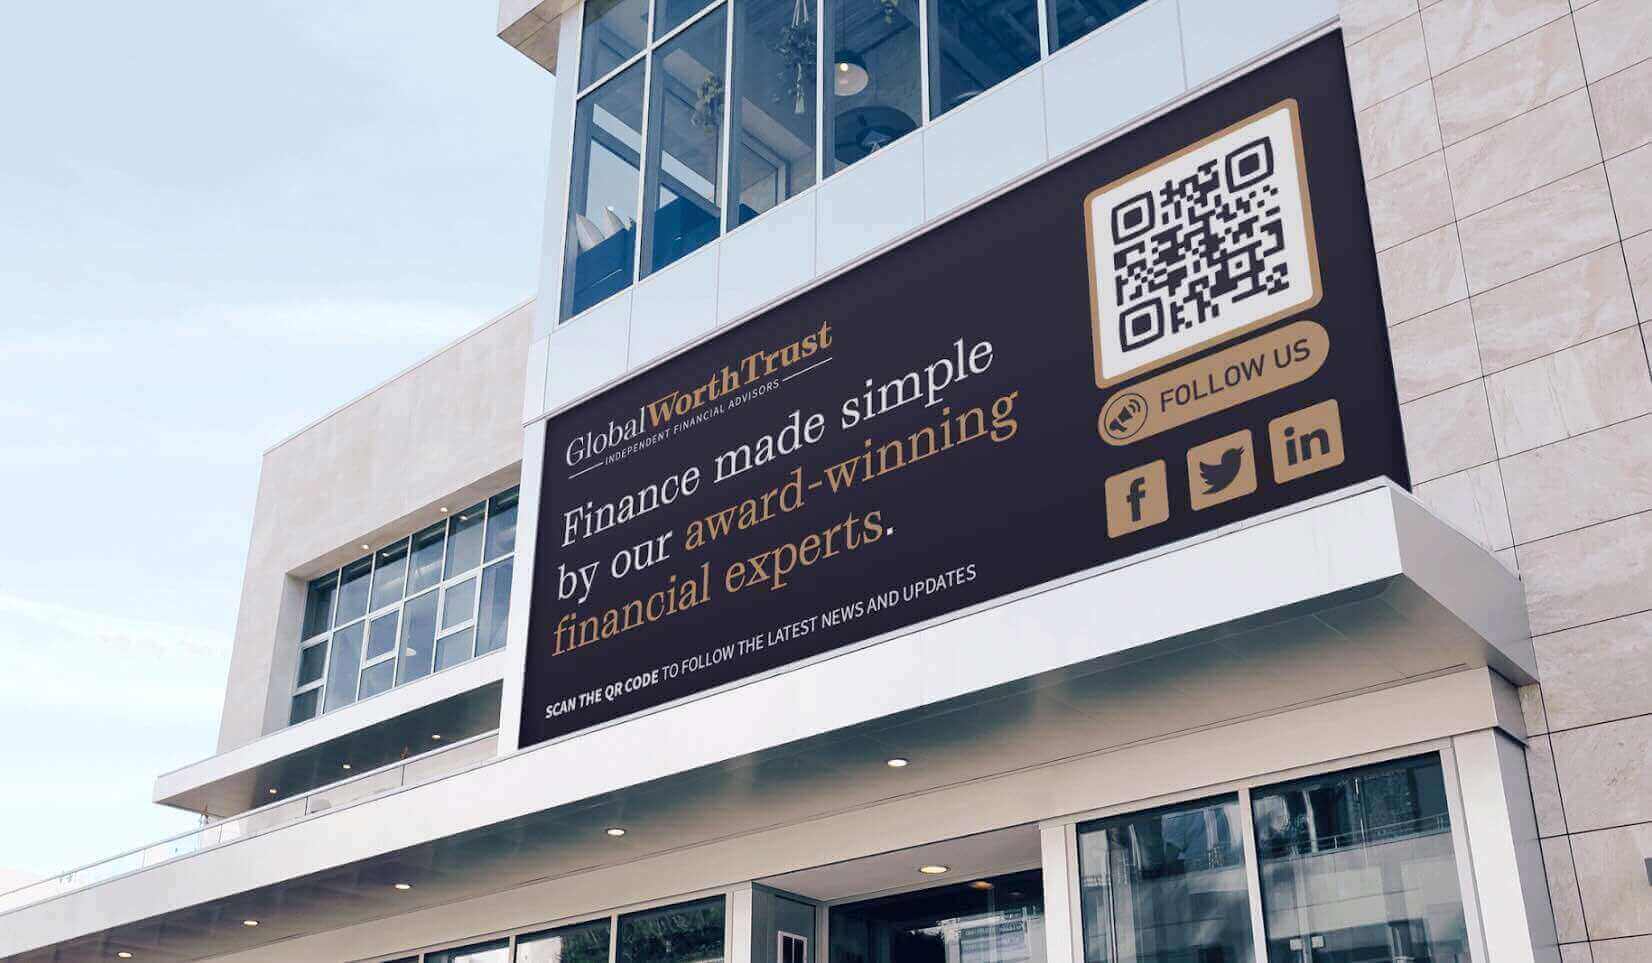 A Finance company's billboard containing a QR Code with a "Follow Us" frame